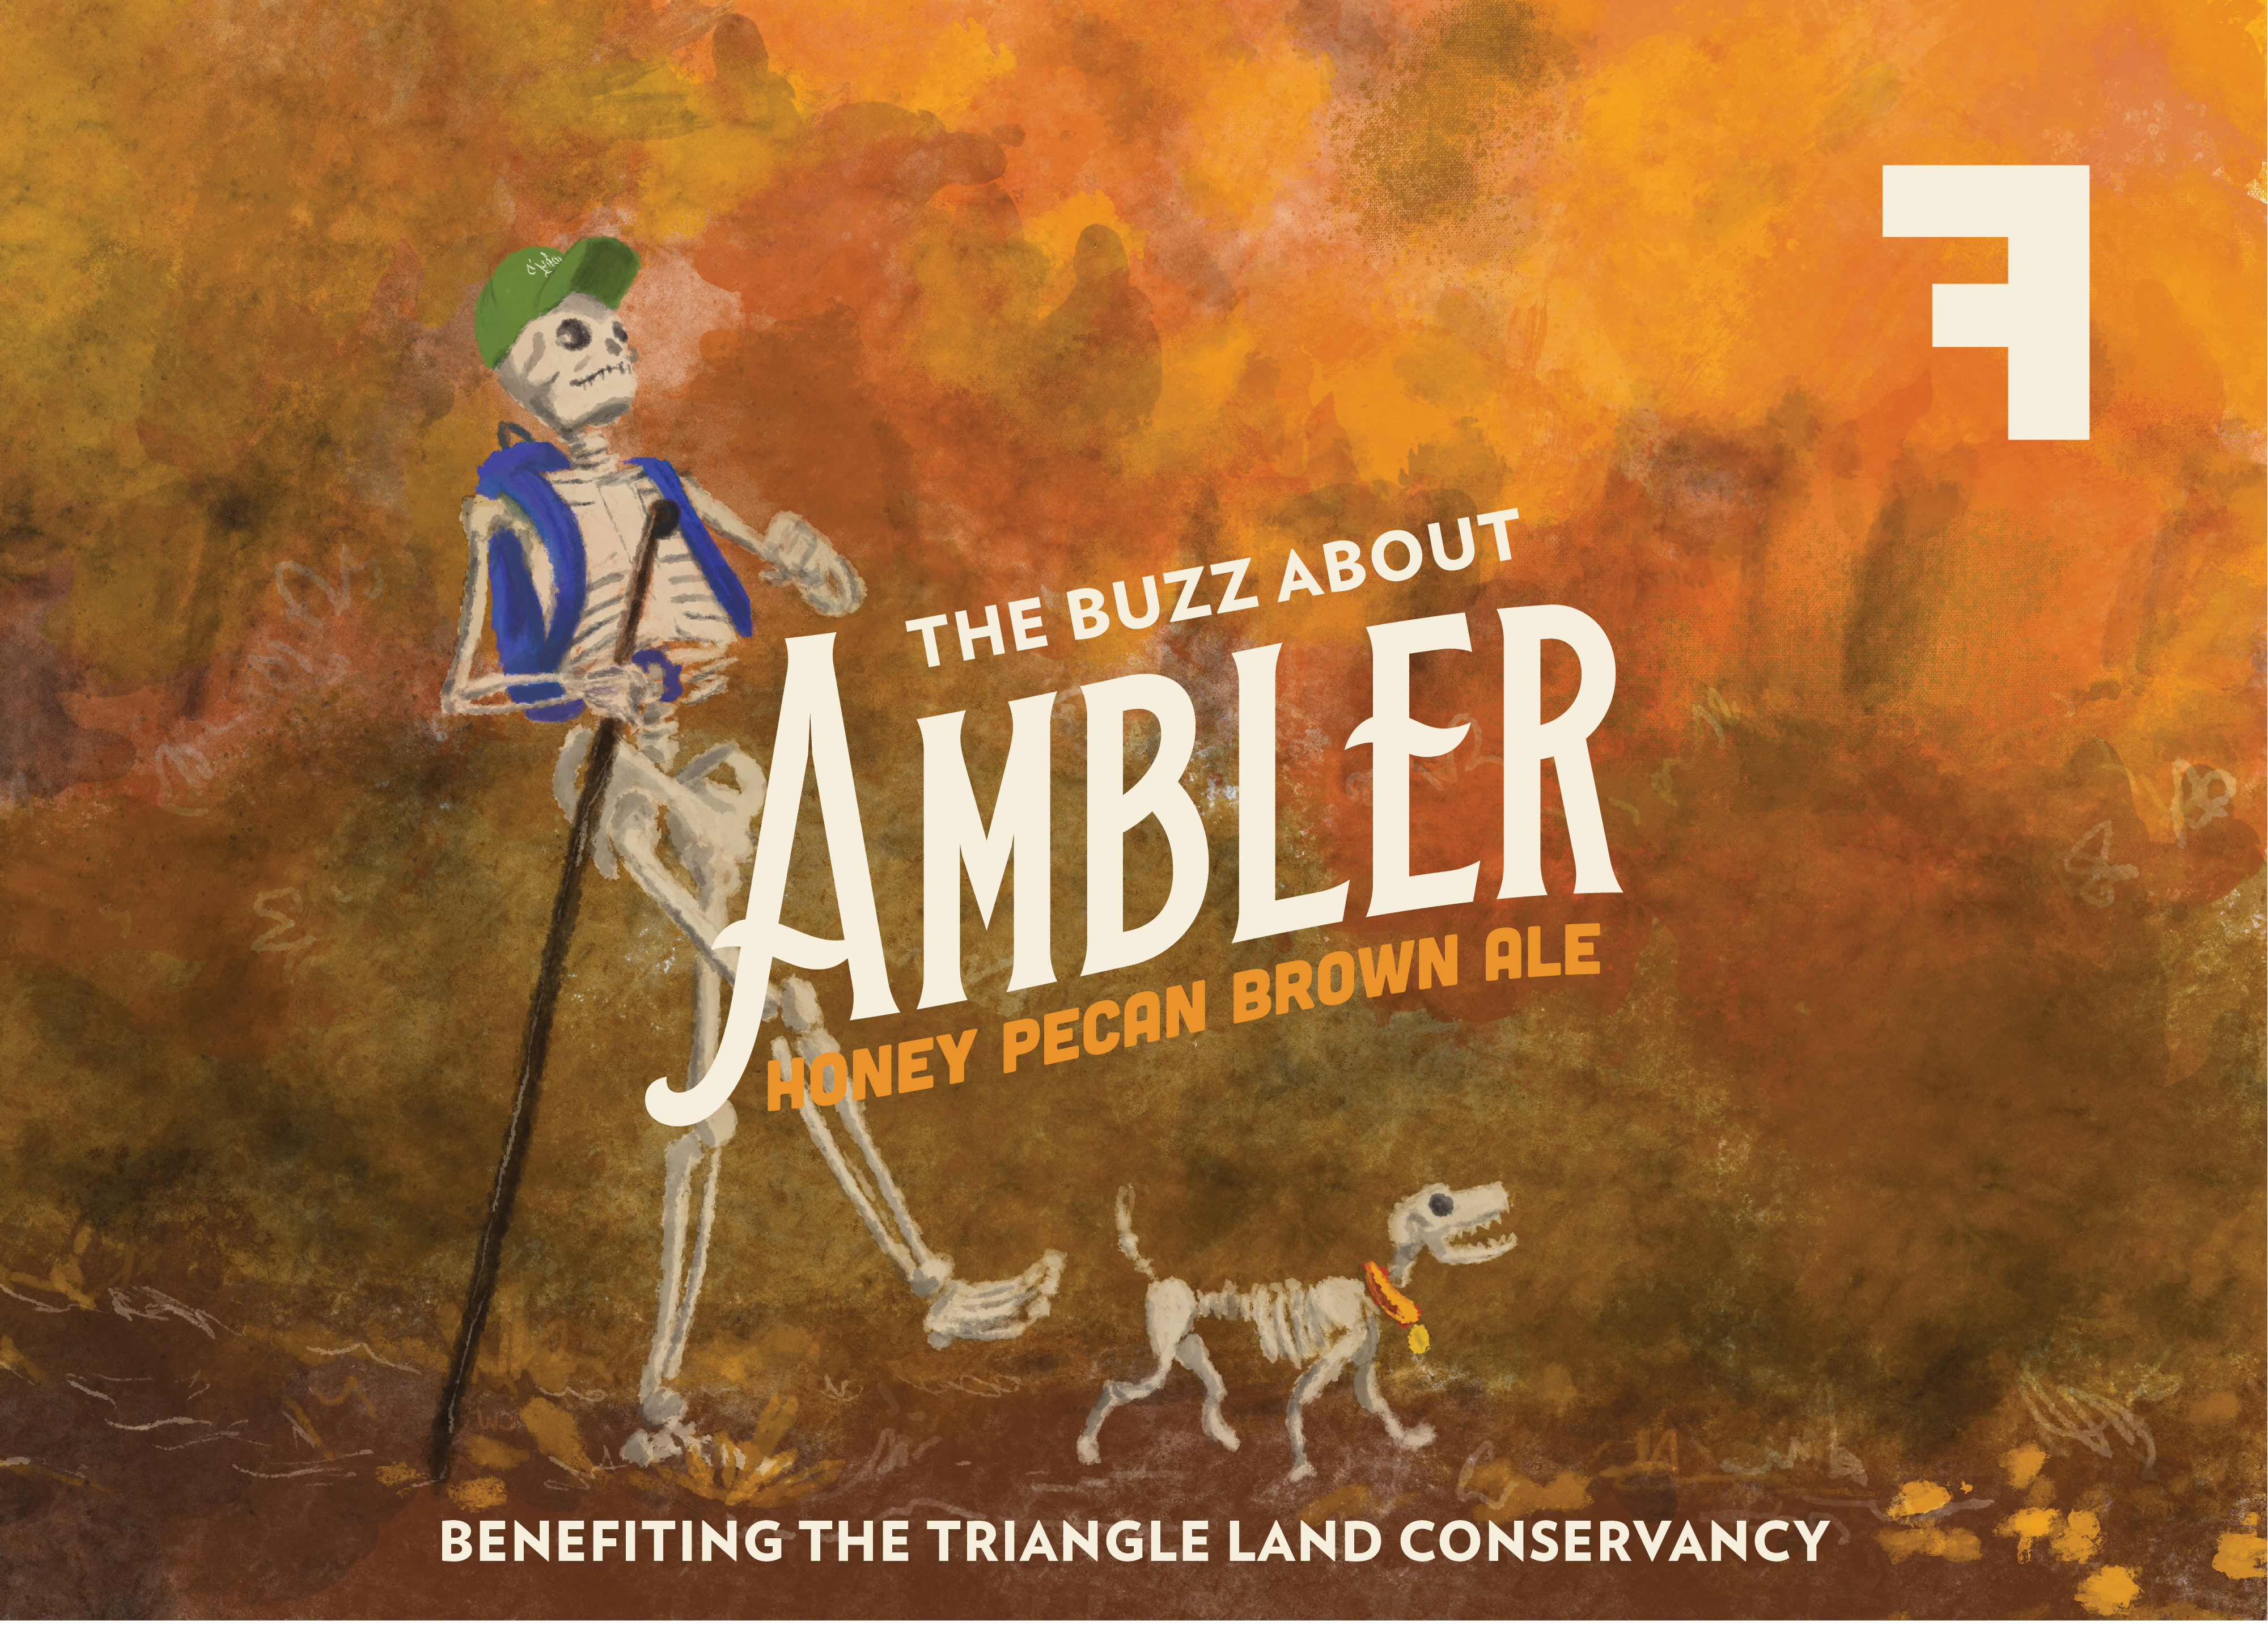 The Buzz About Ambler Release Party